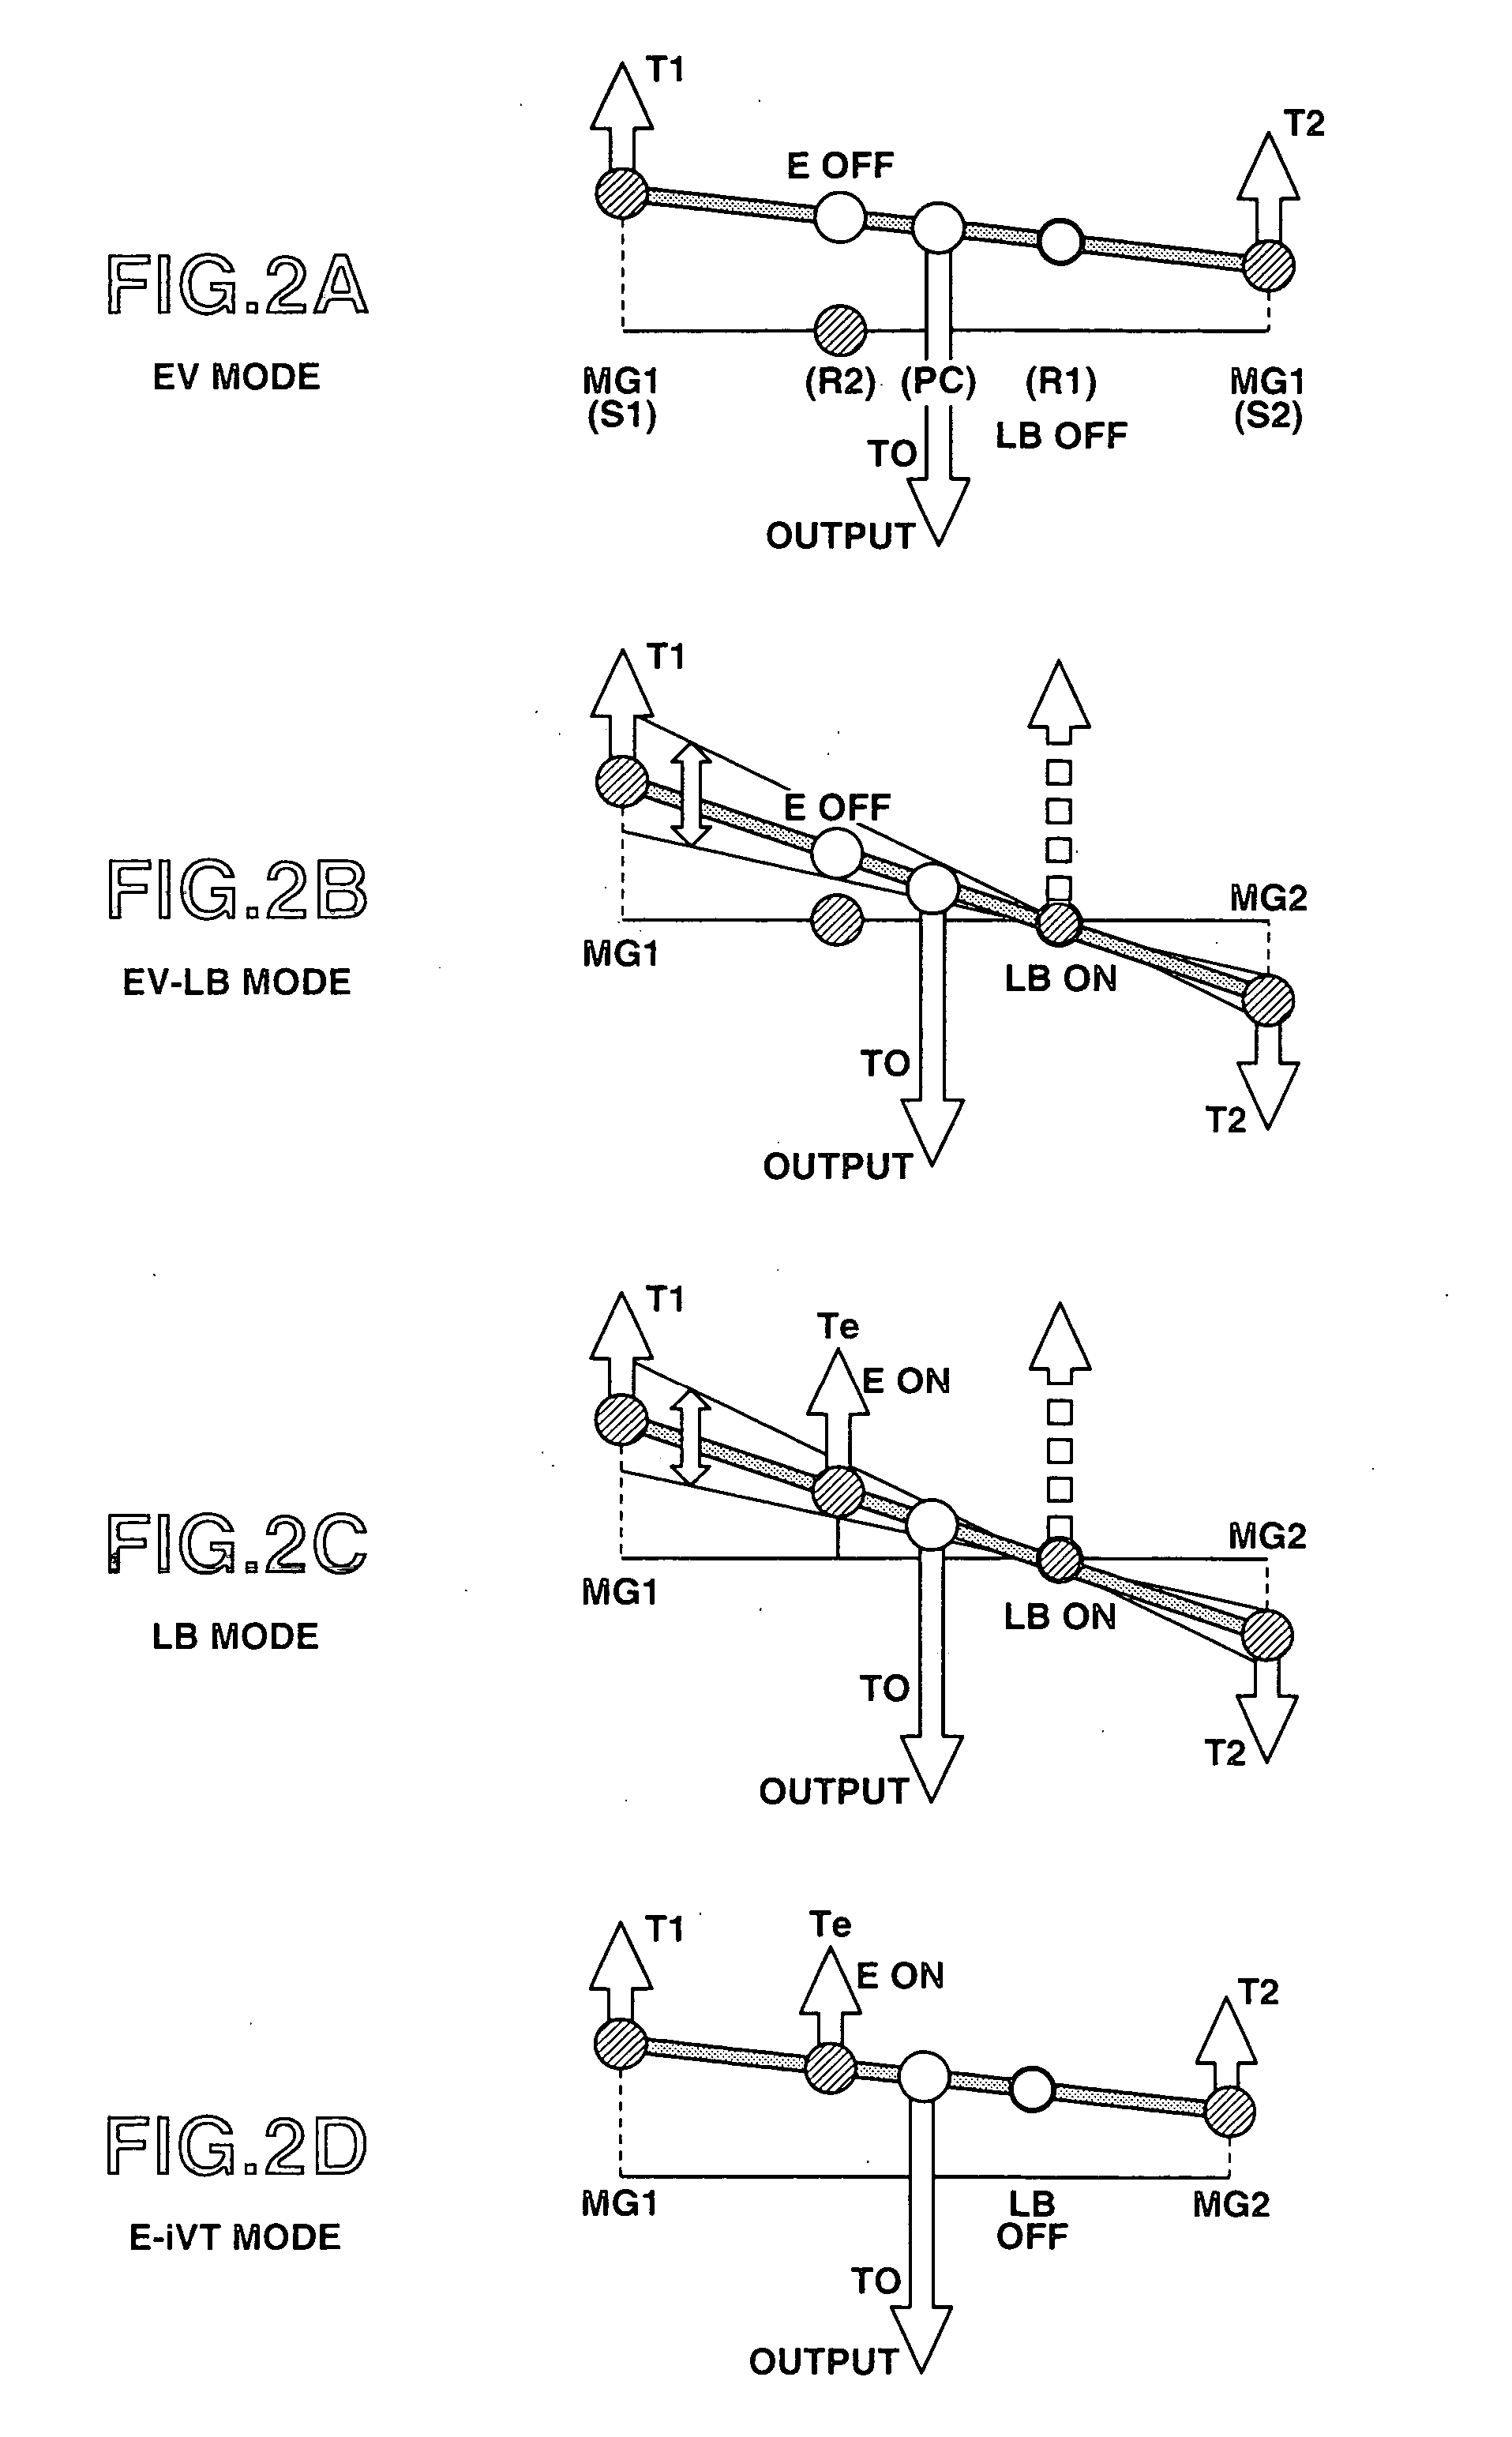 Motor torque control apparatus and method for automotive vehicle